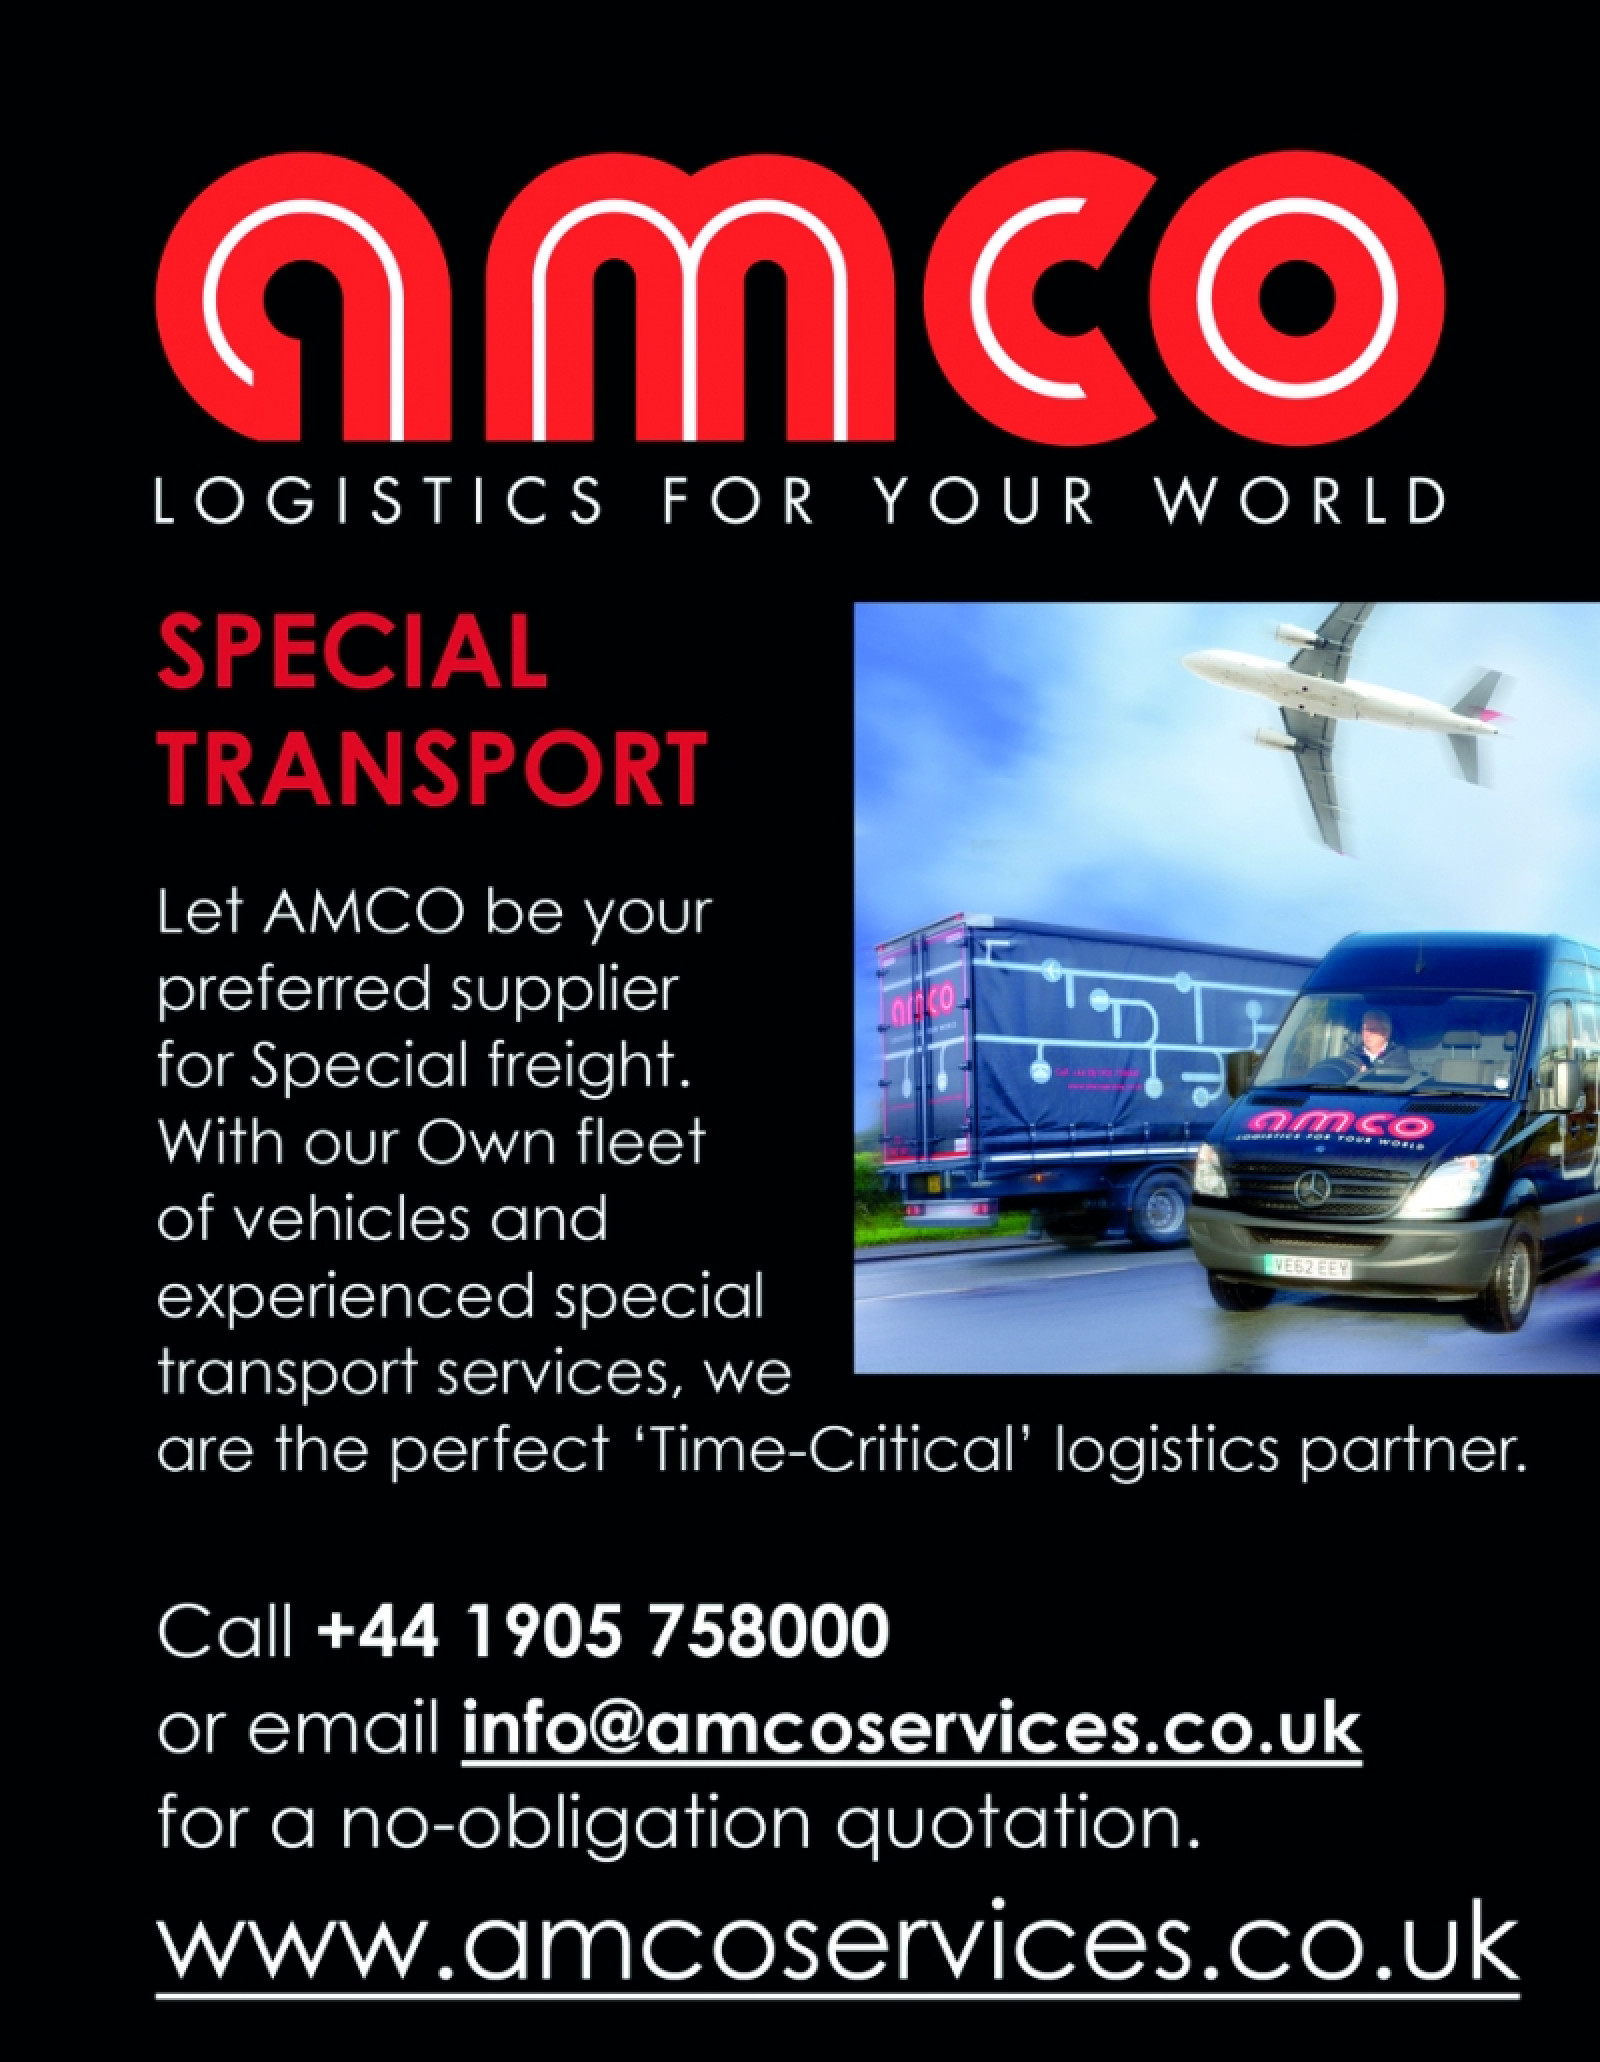 New AMCO Special Transport Campaign launched